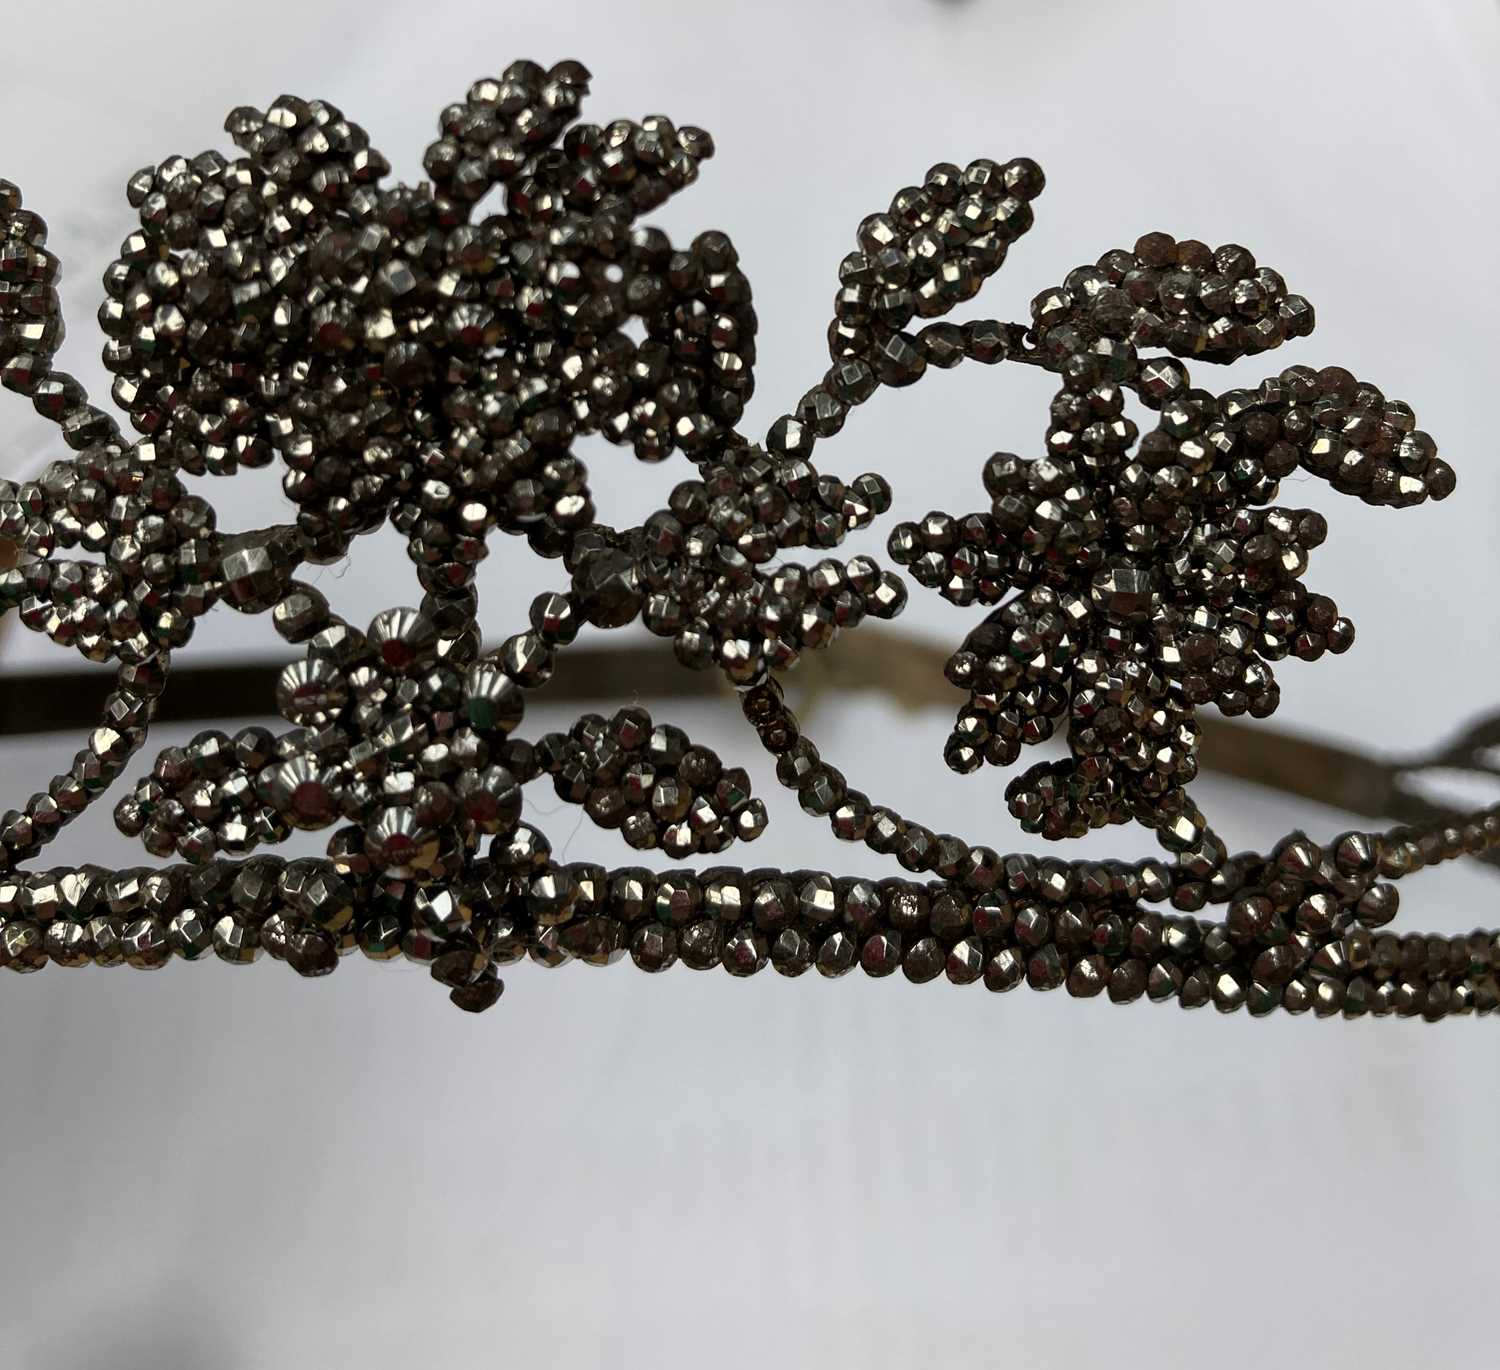 19th Century and Later Cut Steel Jewellery, comprising a decorative tiara with rotating flower heads - Image 3 of 19